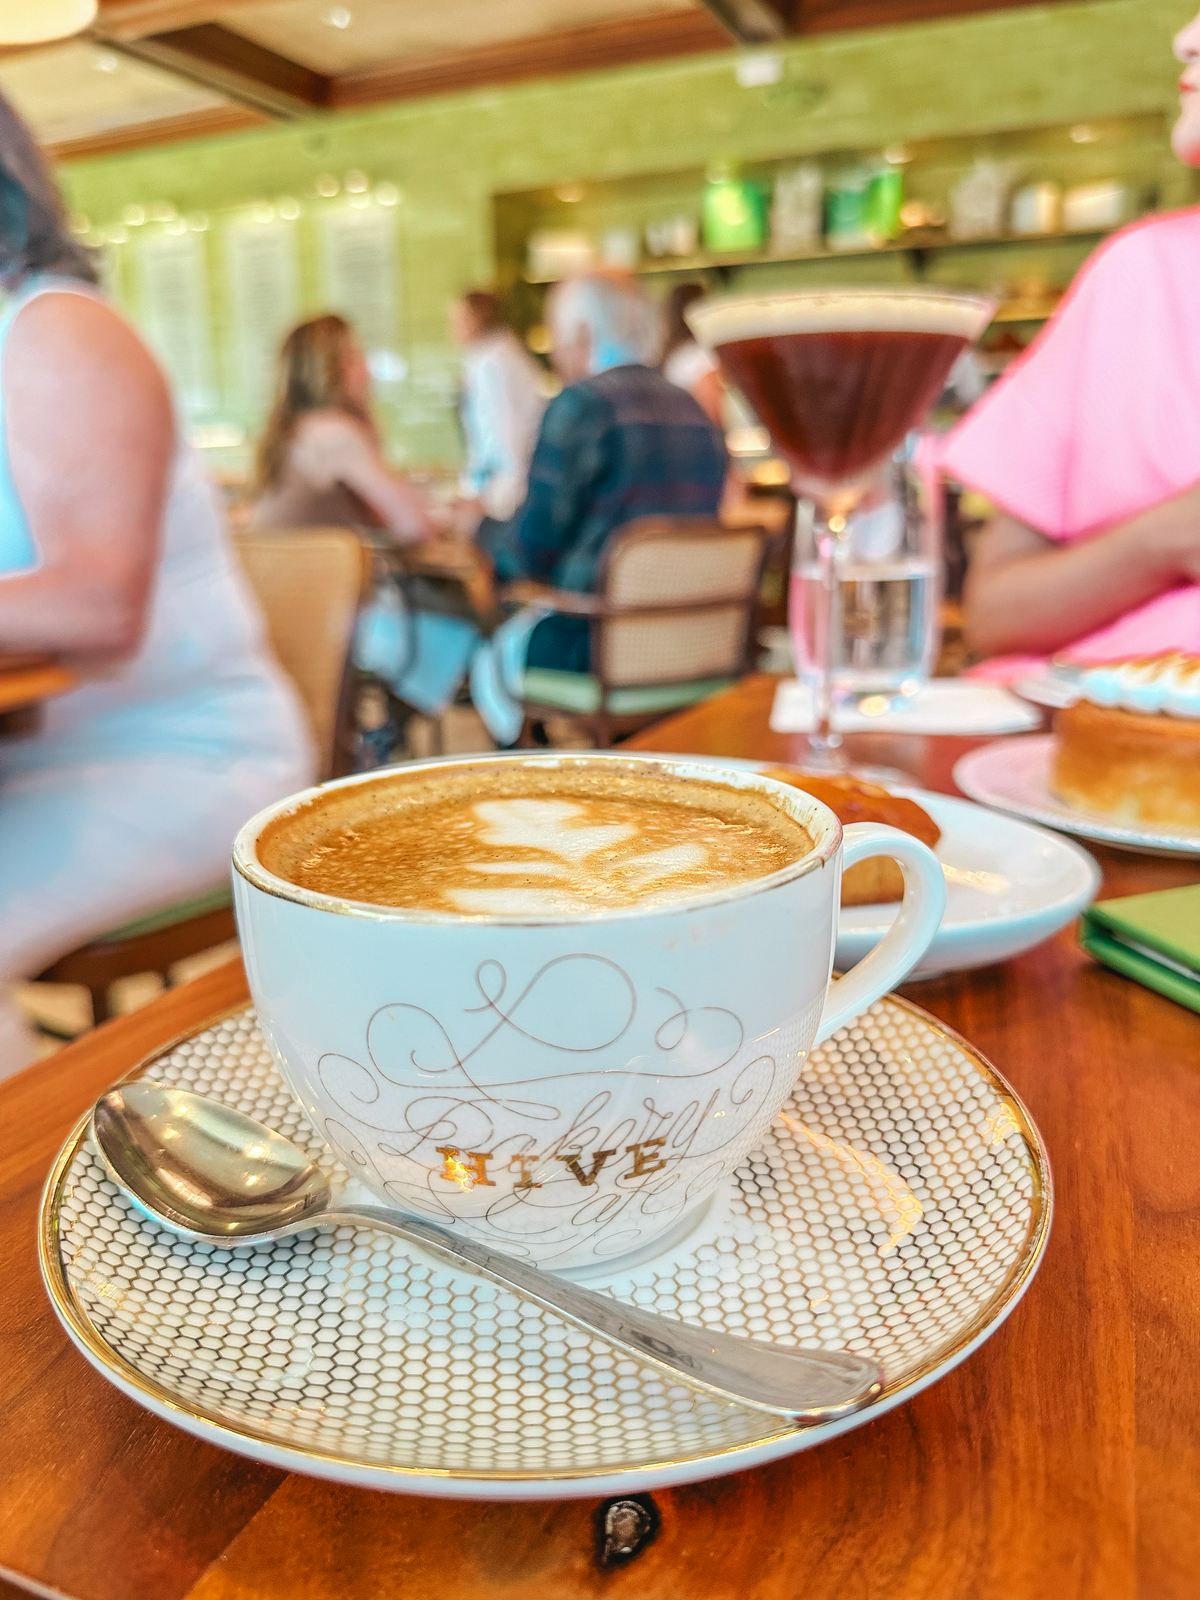 Coffee from The Hive Bakery and Cafe in West Palm Beach